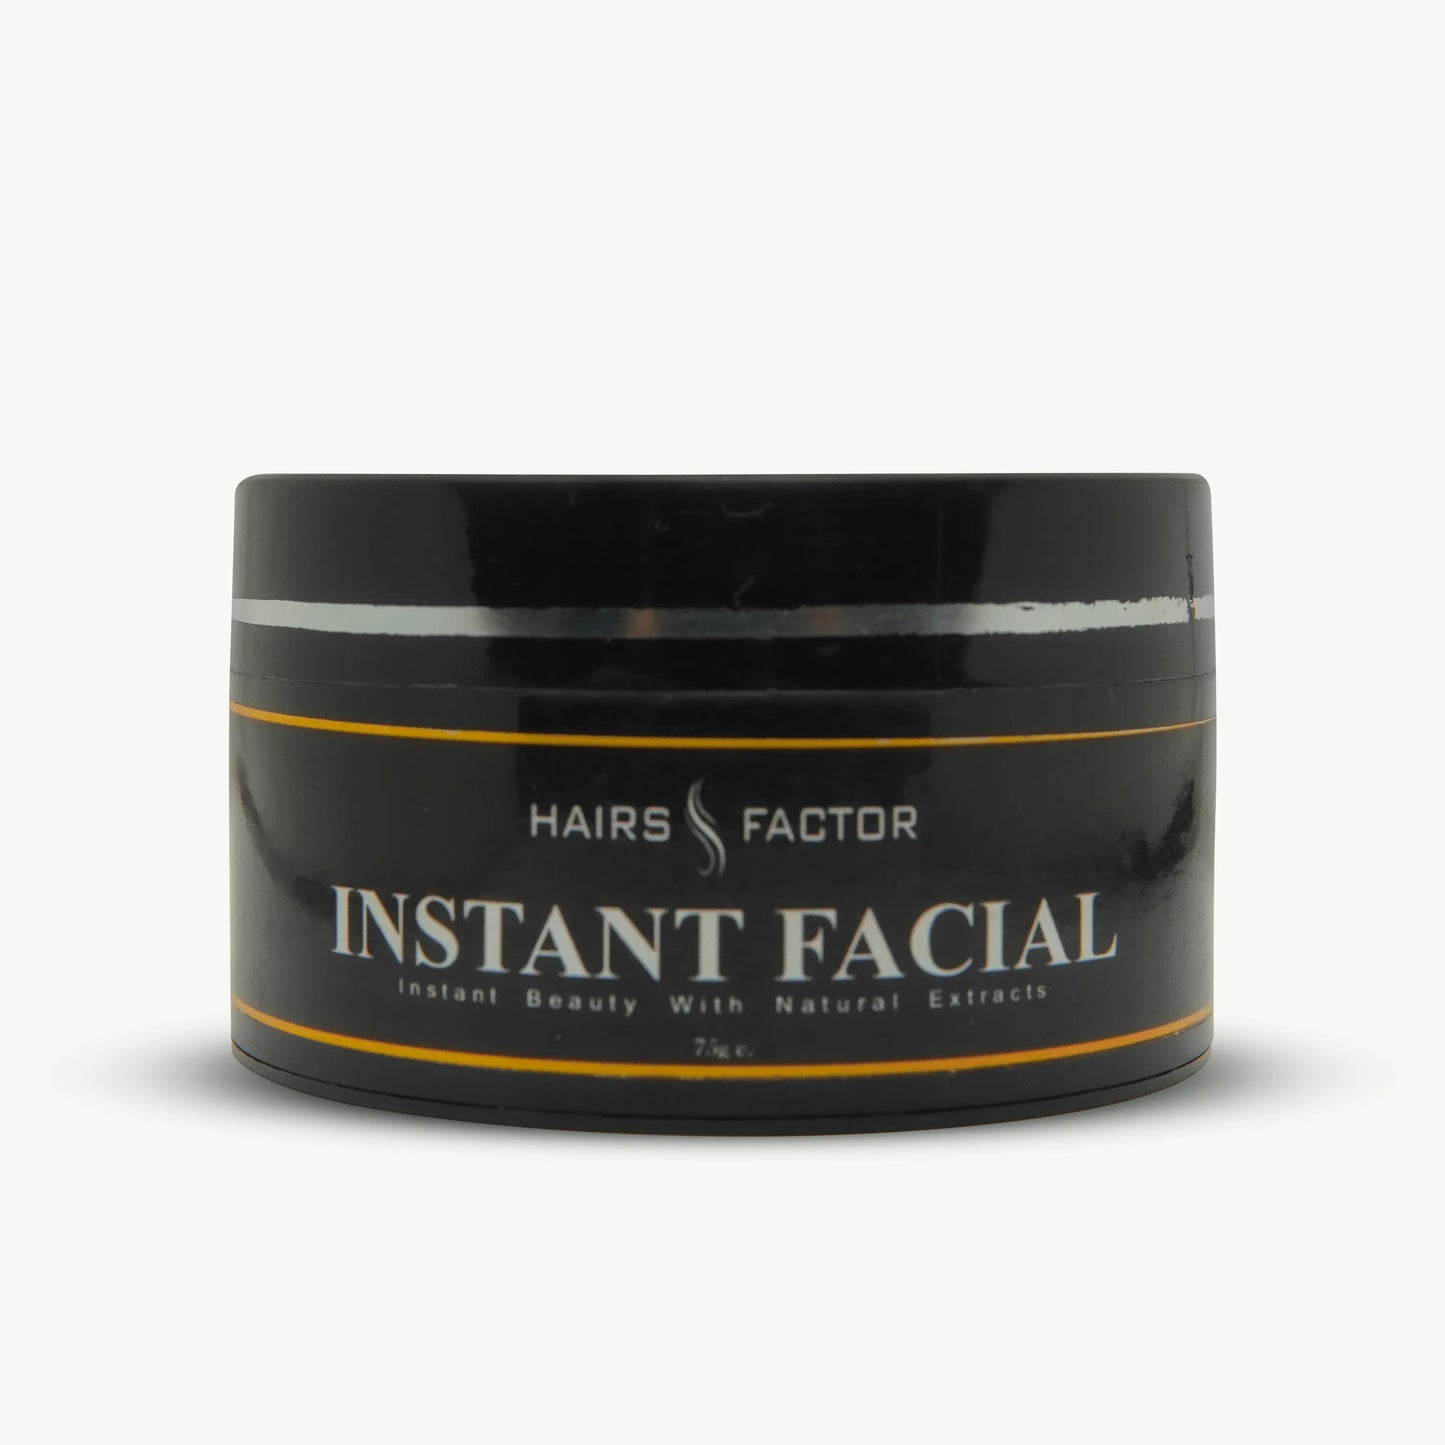 2 IN 1 Whitening INSTANT FACIAL + SCRUB For Instant Glowing Face